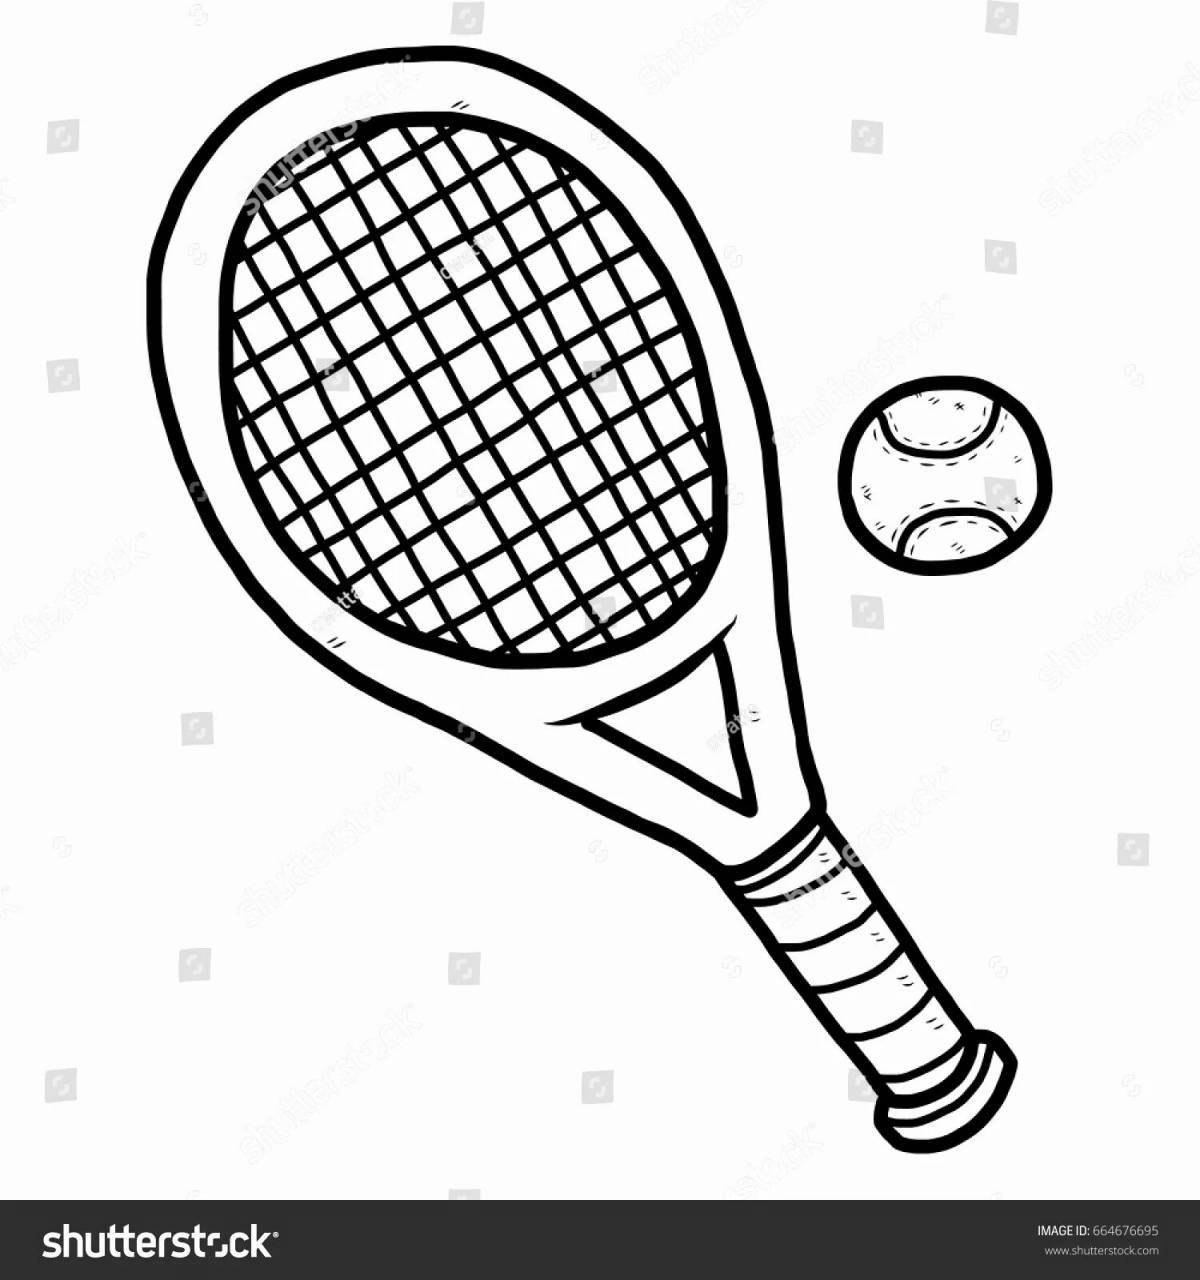 Coloring live tennis racket